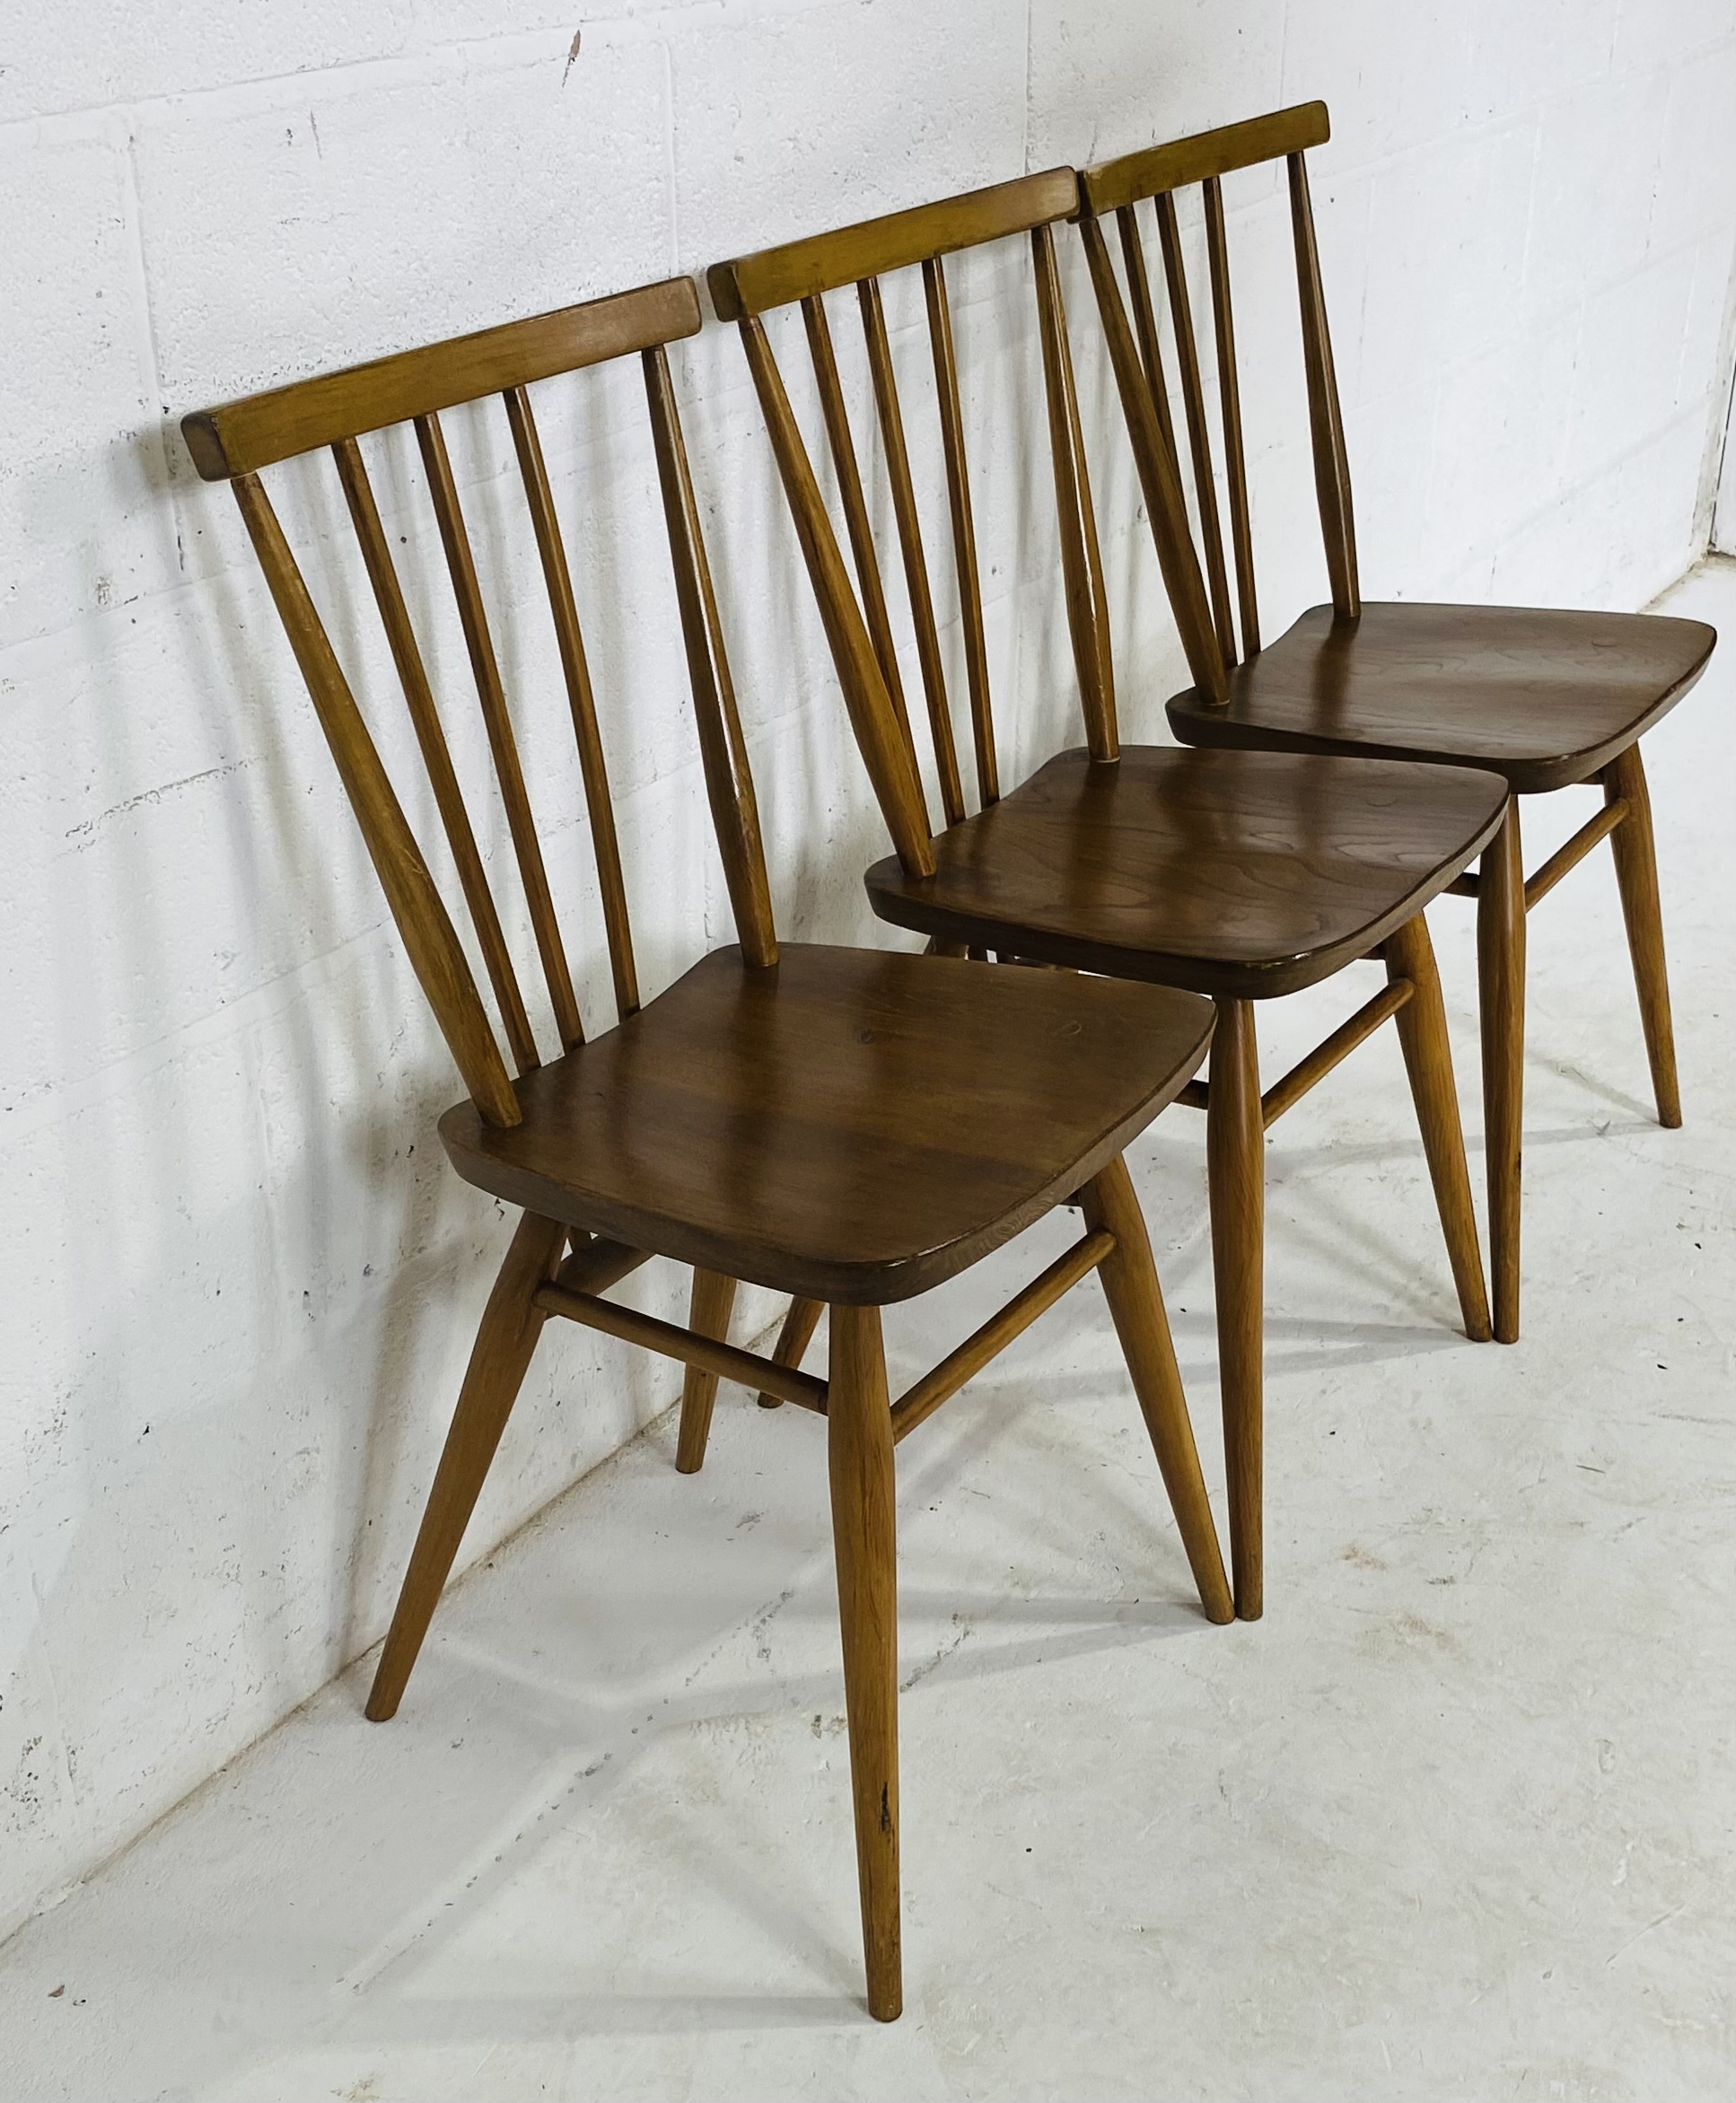 Three vintage Ercol chairs - Image 5 of 5